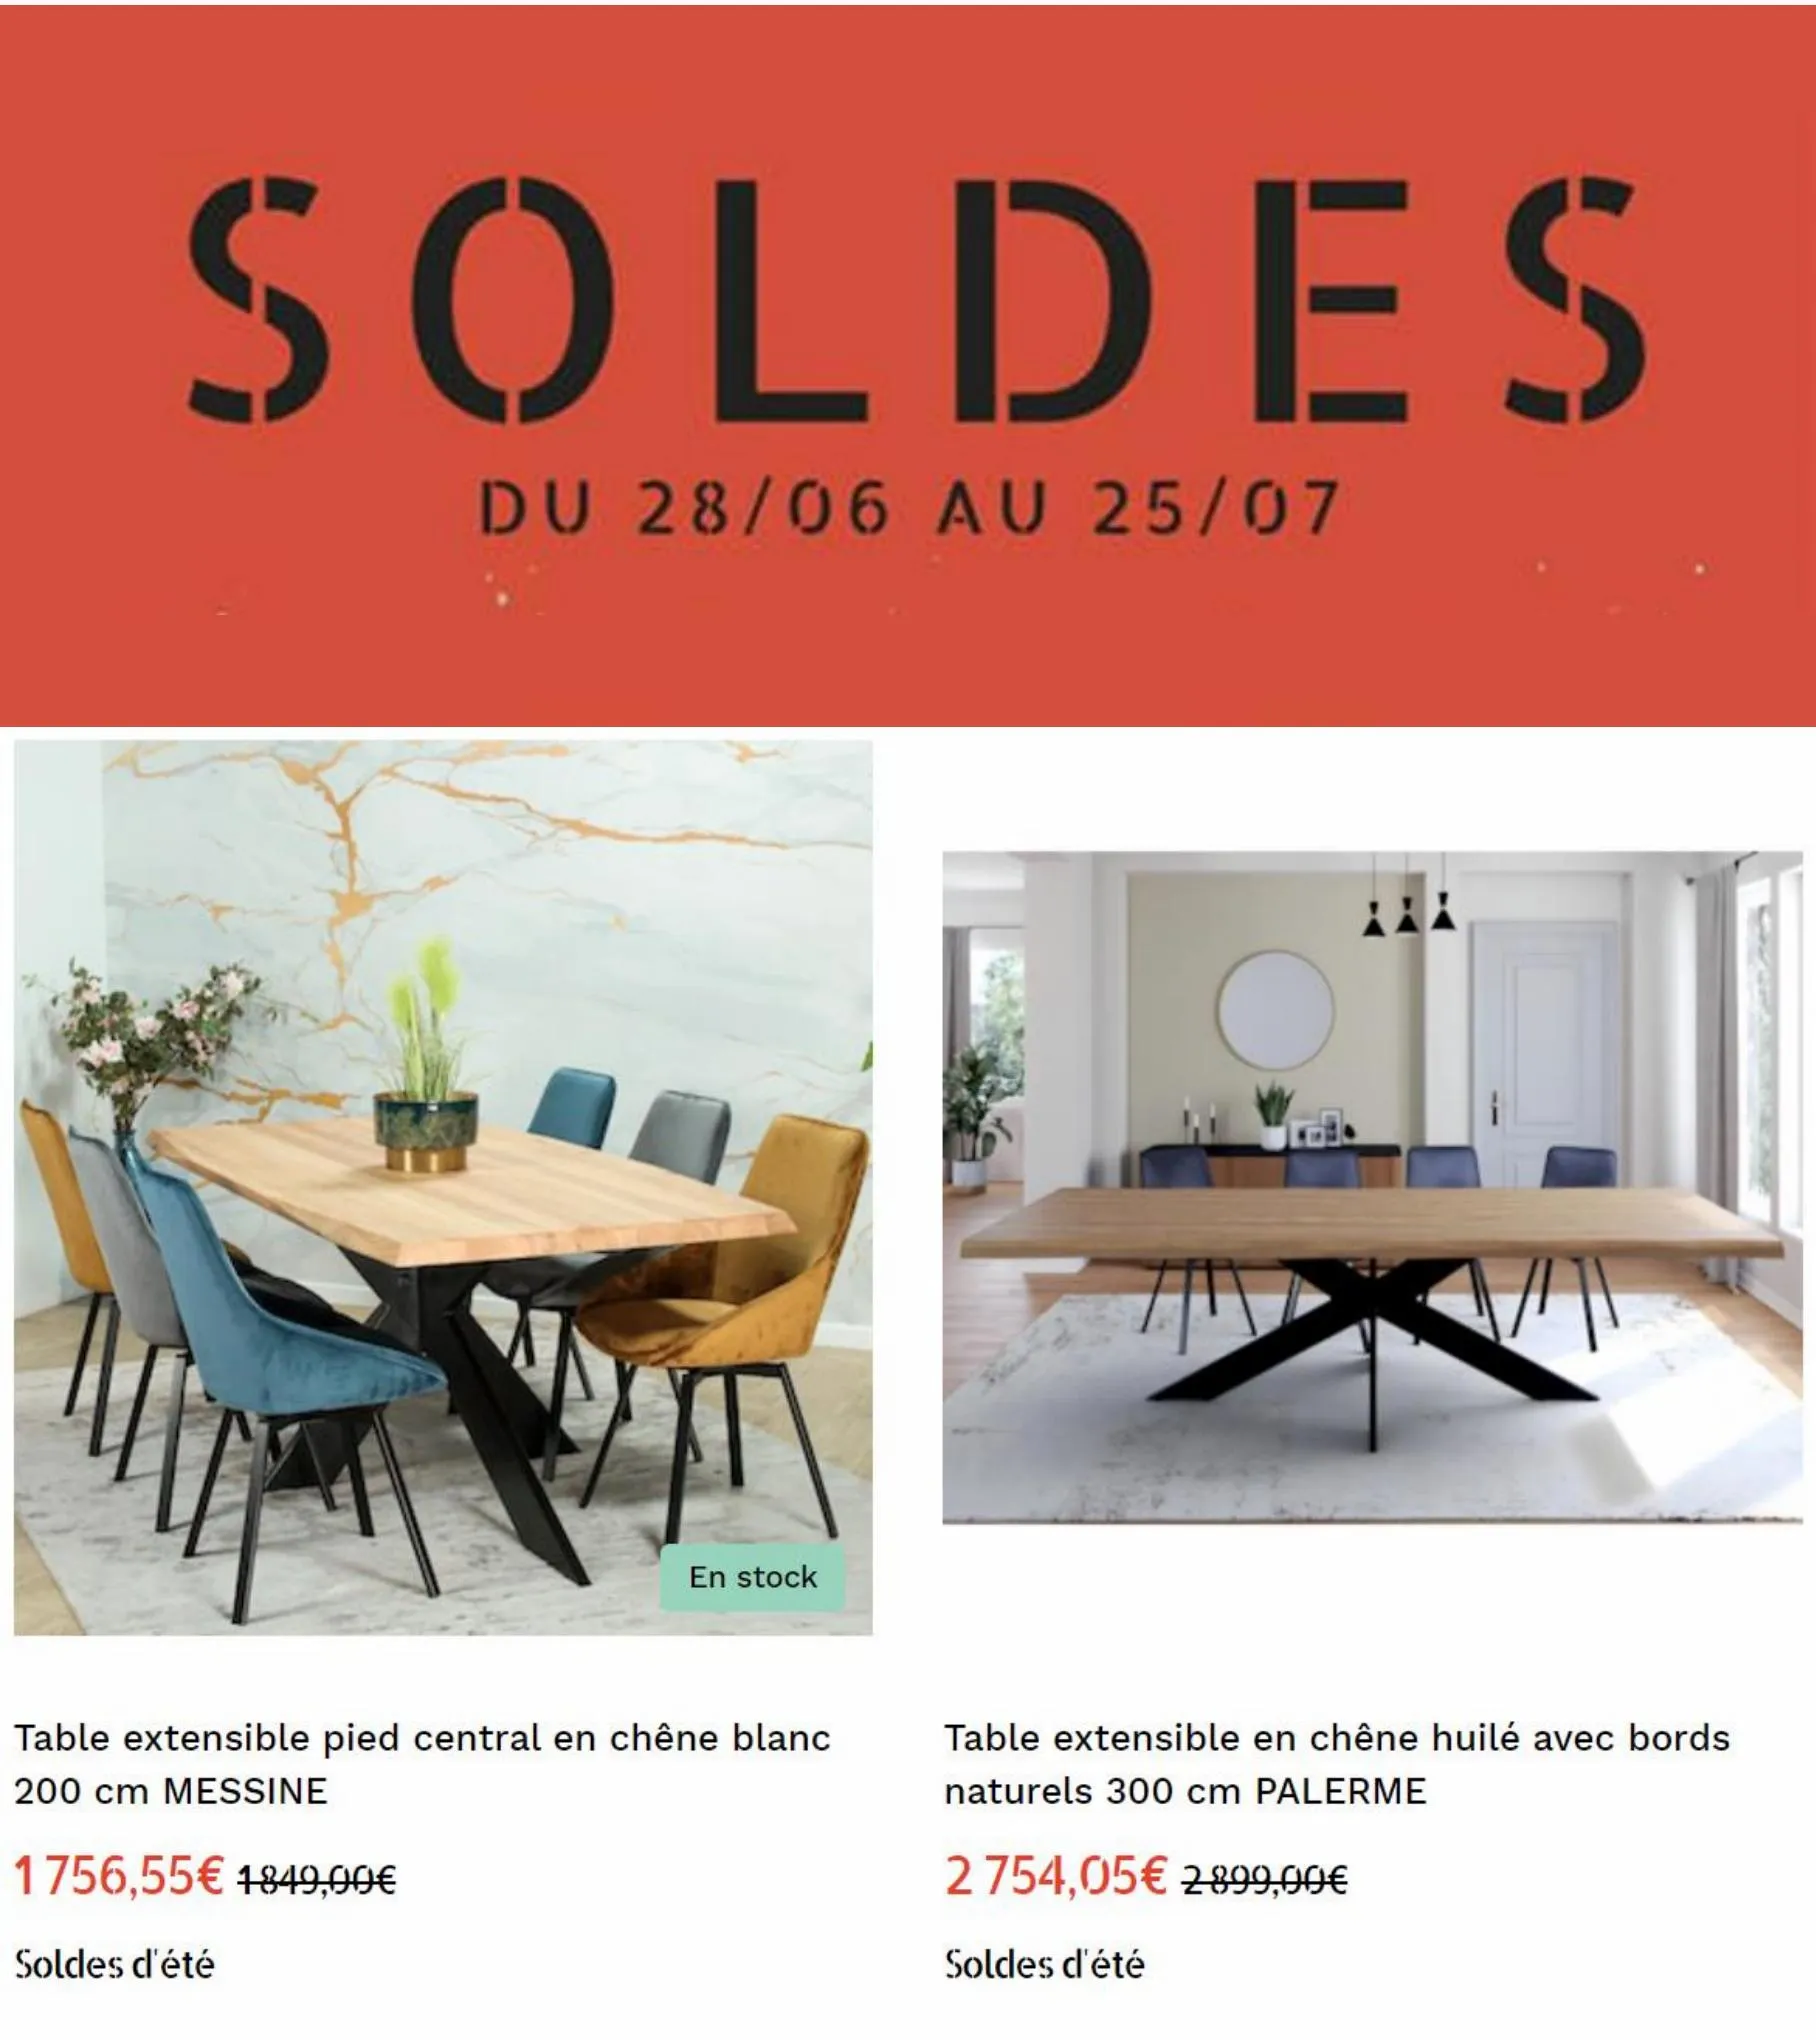 Catalogue Soldes, page 00005